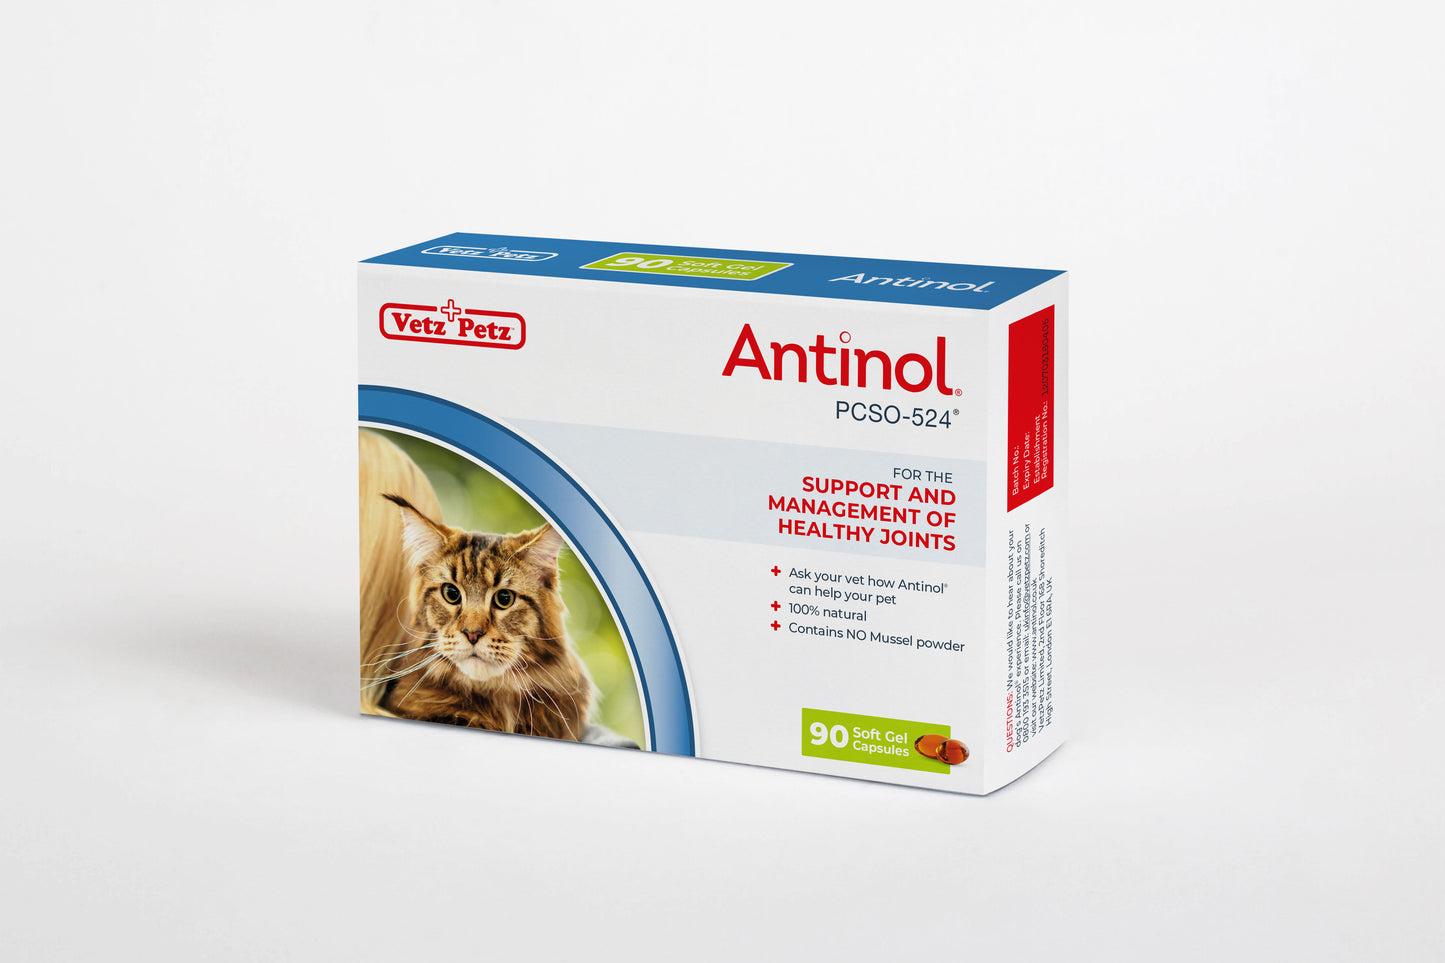 Antinol<sup>®</sup> for Cats